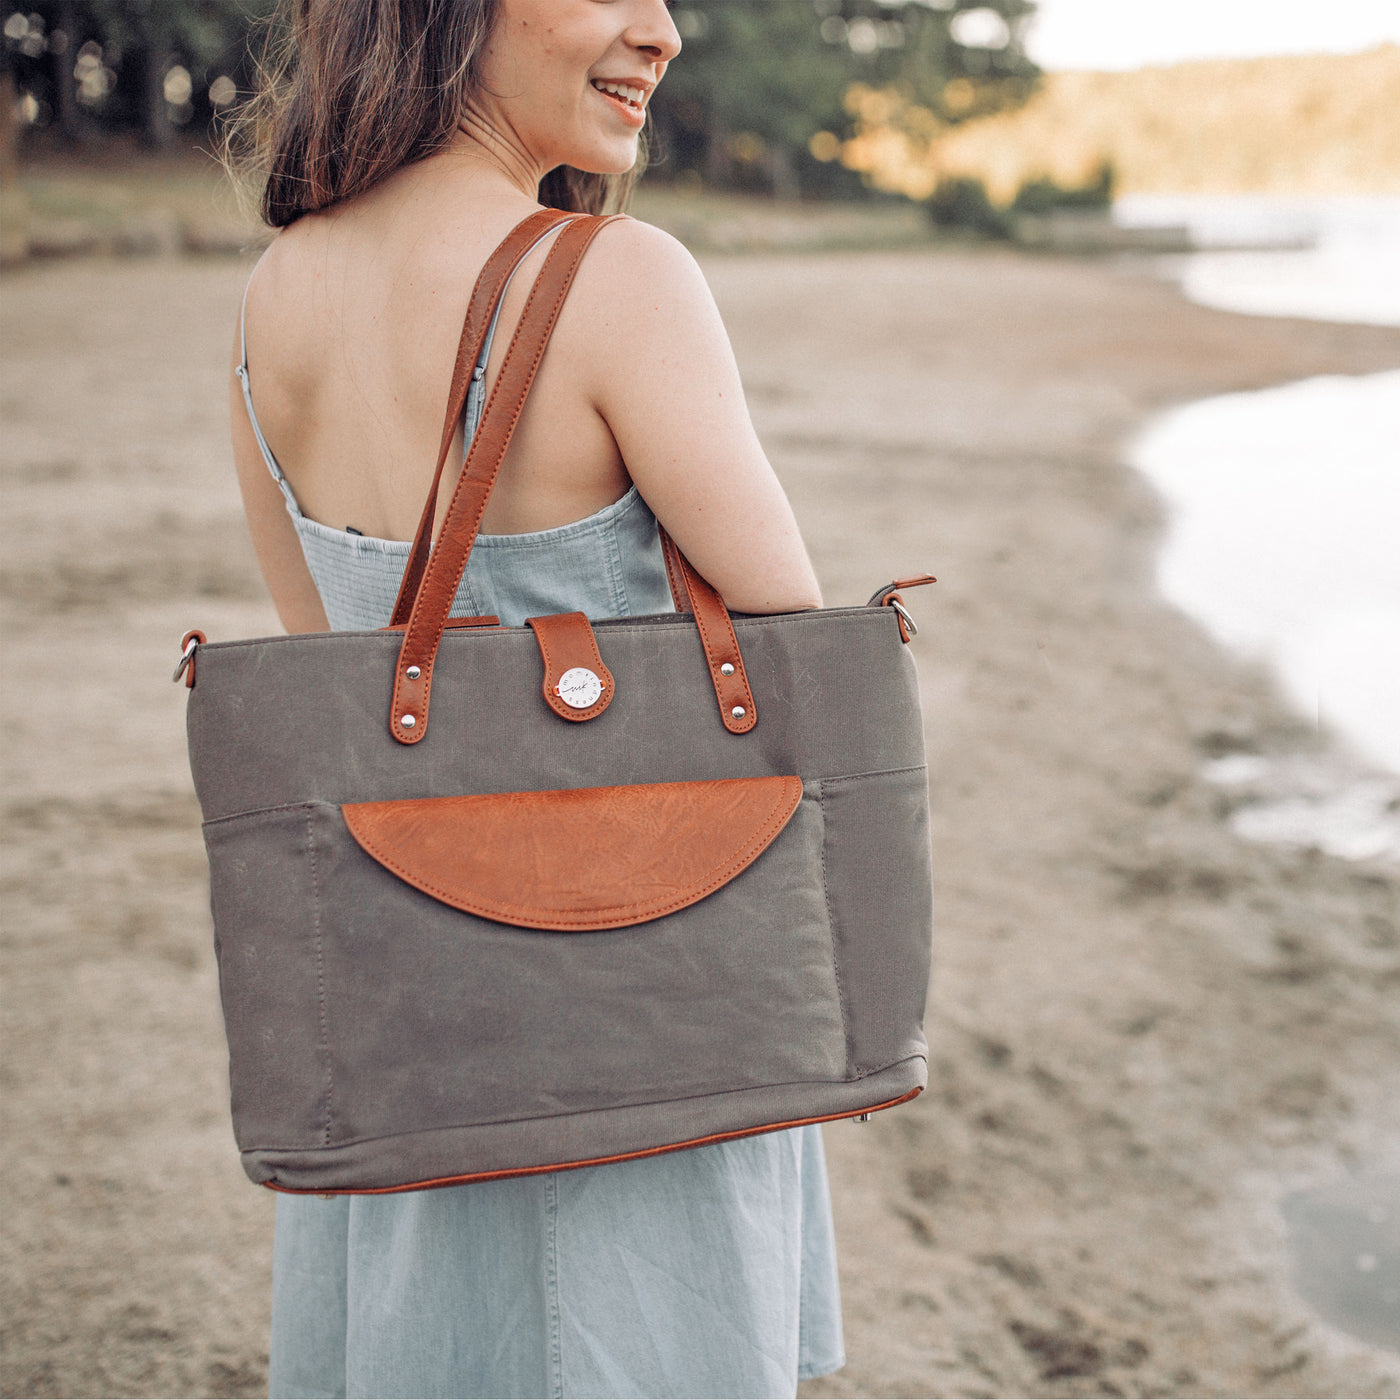 A woman in a denim dress standing outside by a lakeshore carrying a grey canvas carryall tote bag with caramel brown vegan leather accents. 